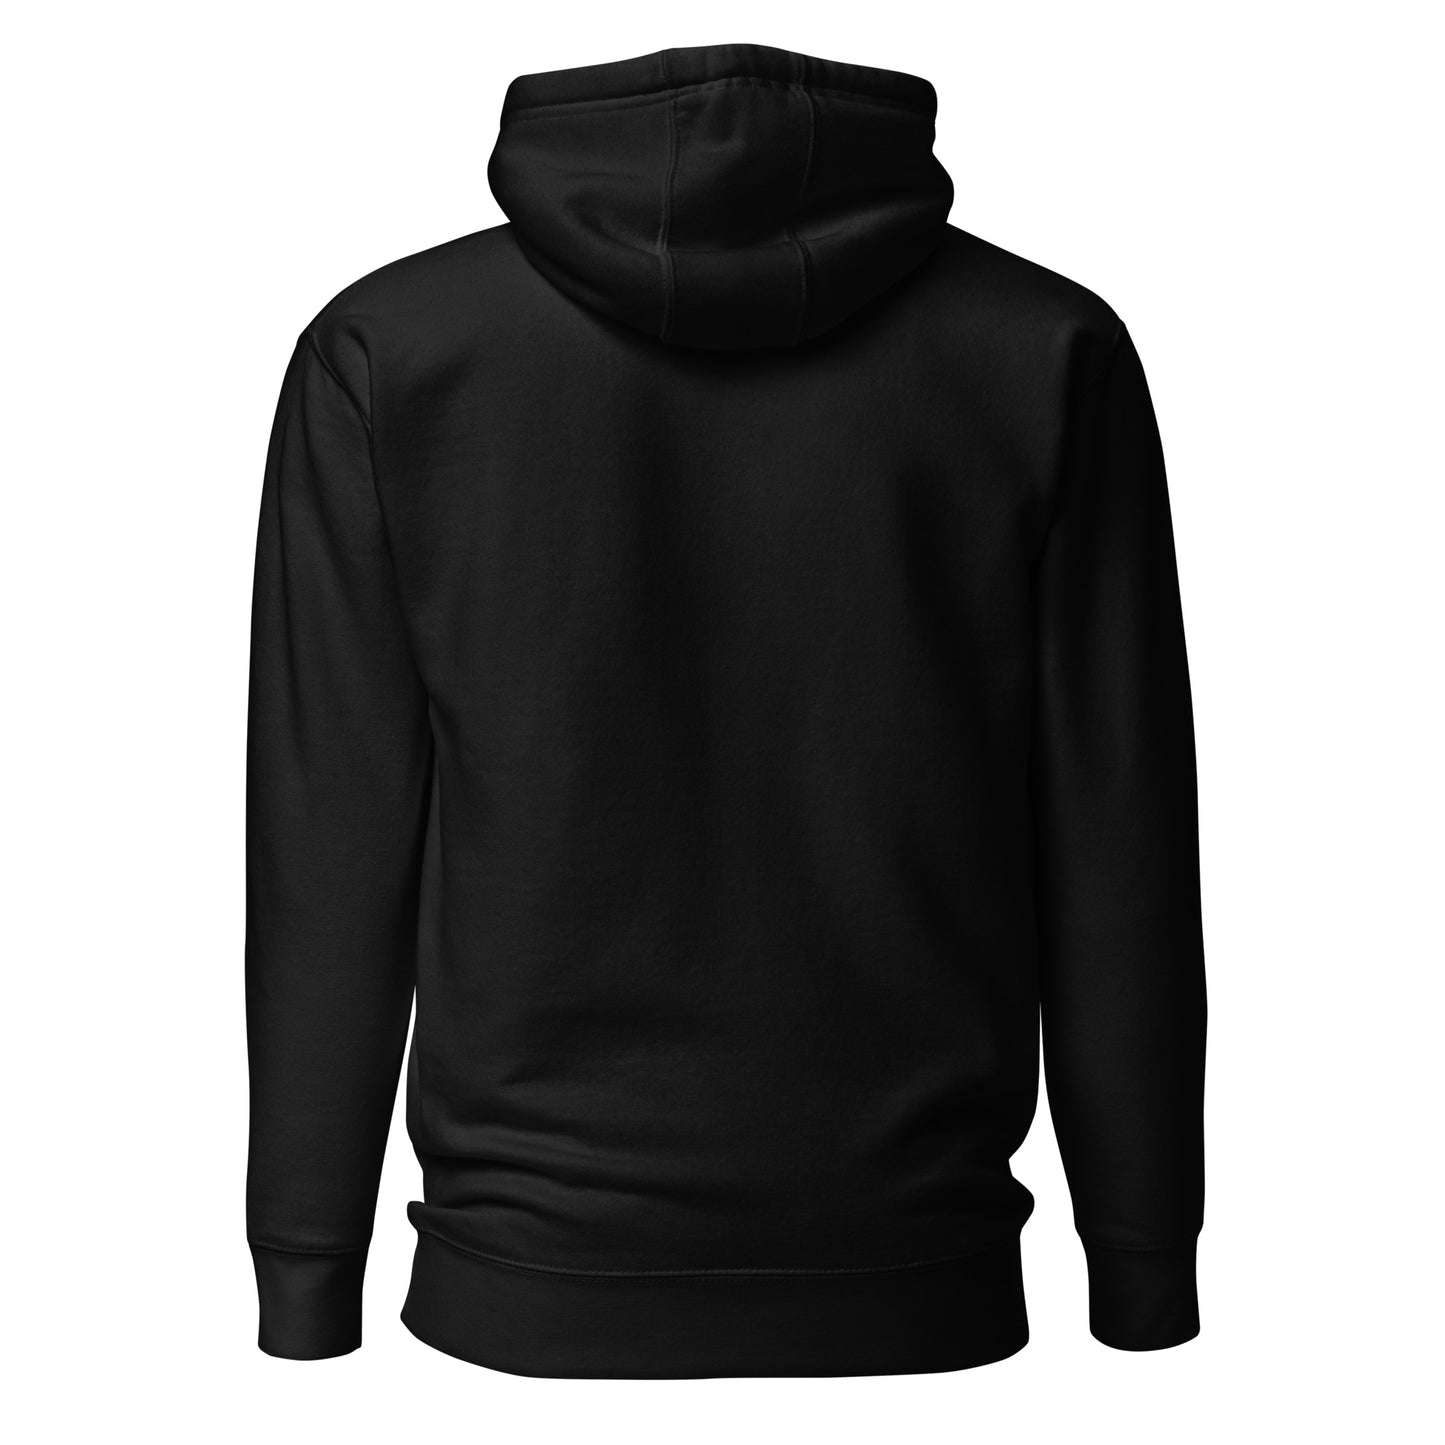 Capital Gains Entrepreneur Hoodie for Startup Owners